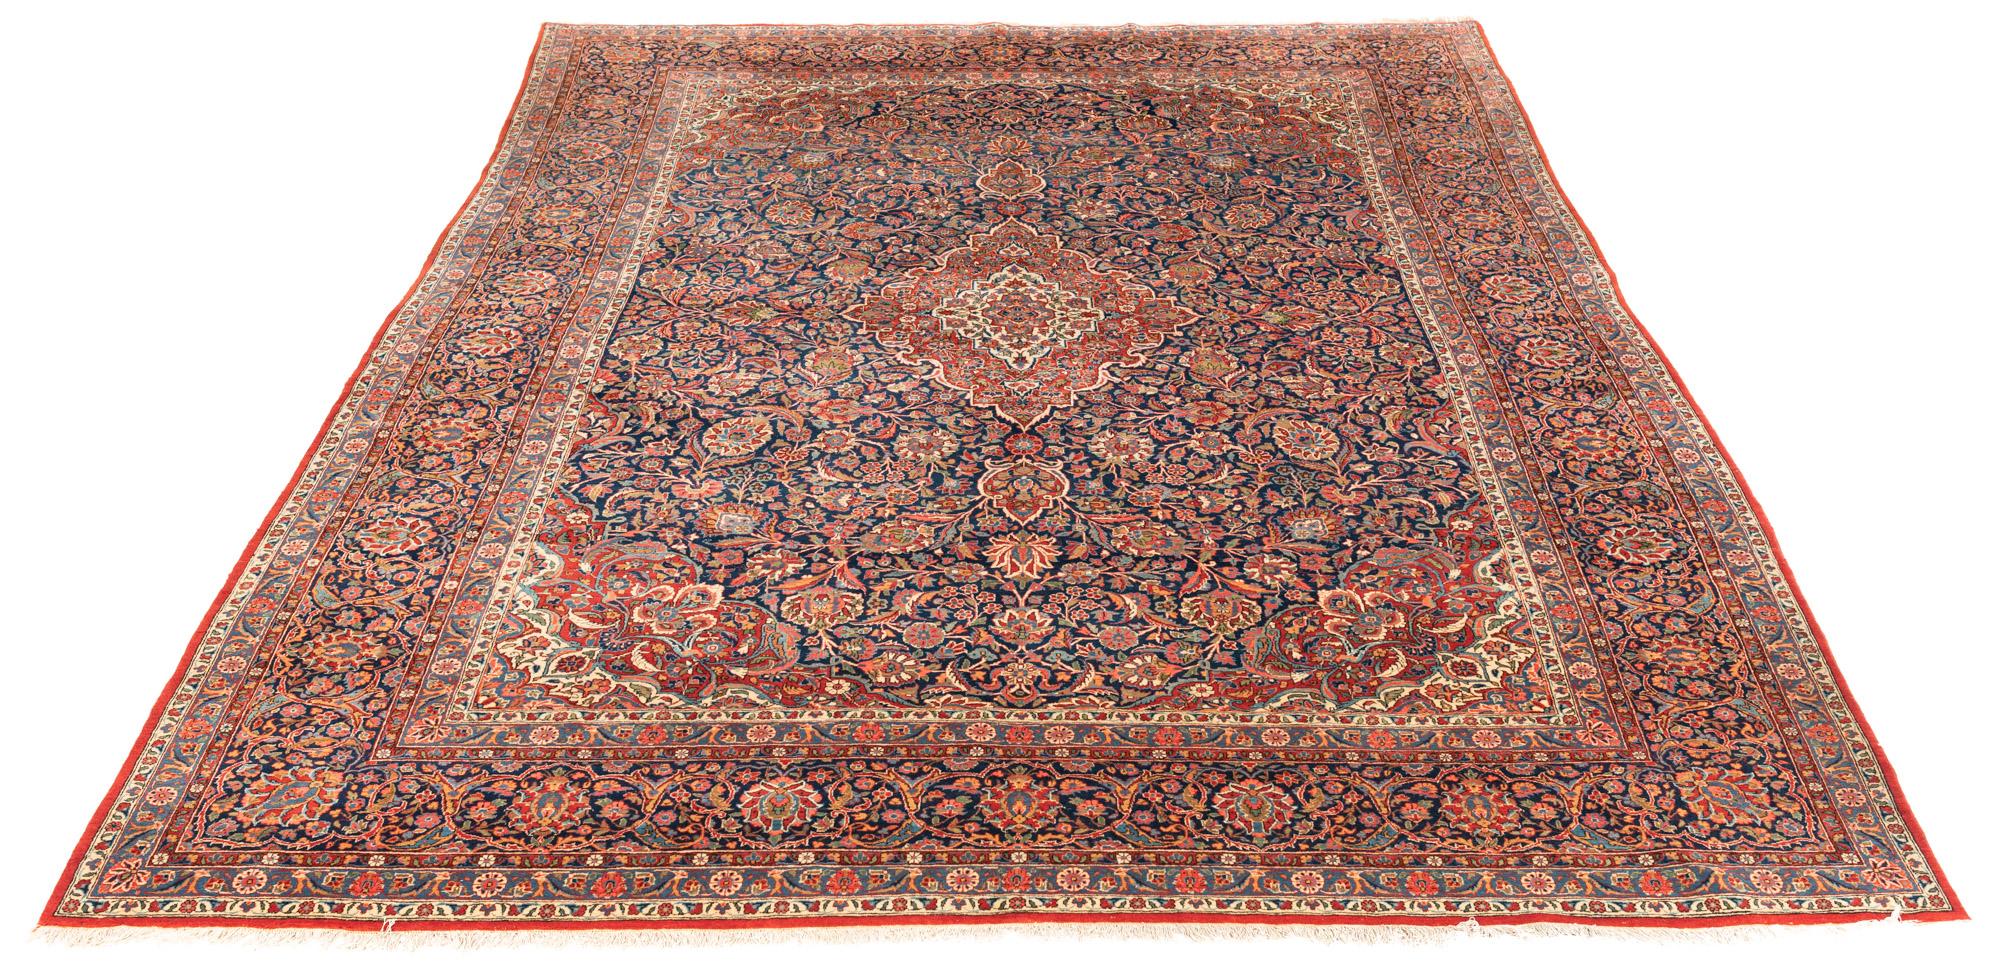 A wonderful example of the highest tier of quality carpets handwoven in Kashan, Persia in the early part of the 20th century.  The dominant feature of this piece is the highly elaborate and sophisticated floral design that fills the navy blue field